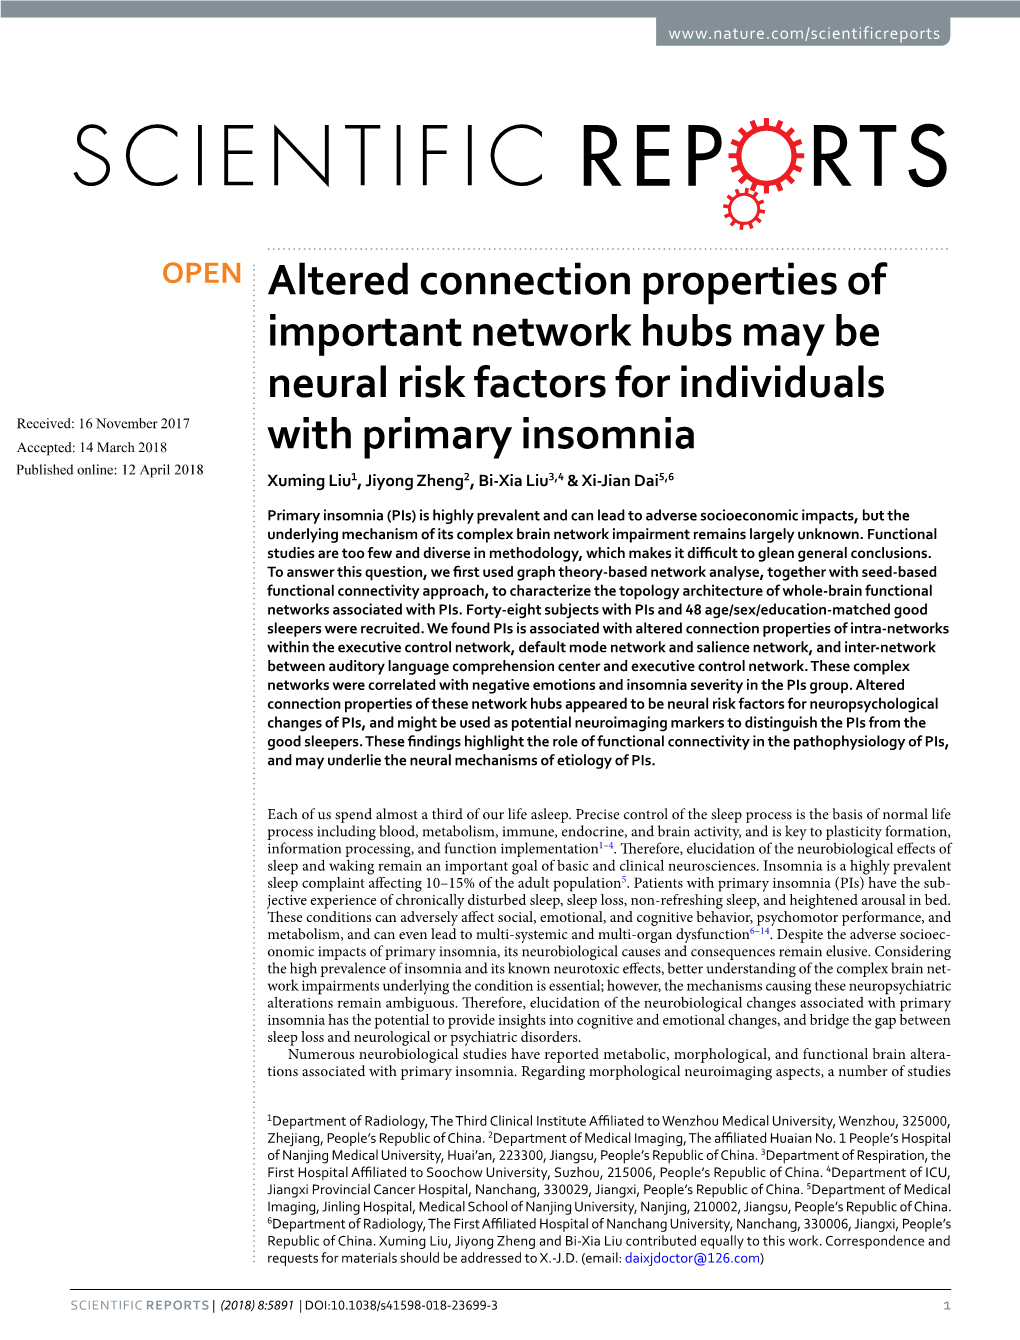 Altered Connection Properties of Important Network Hubs May Be